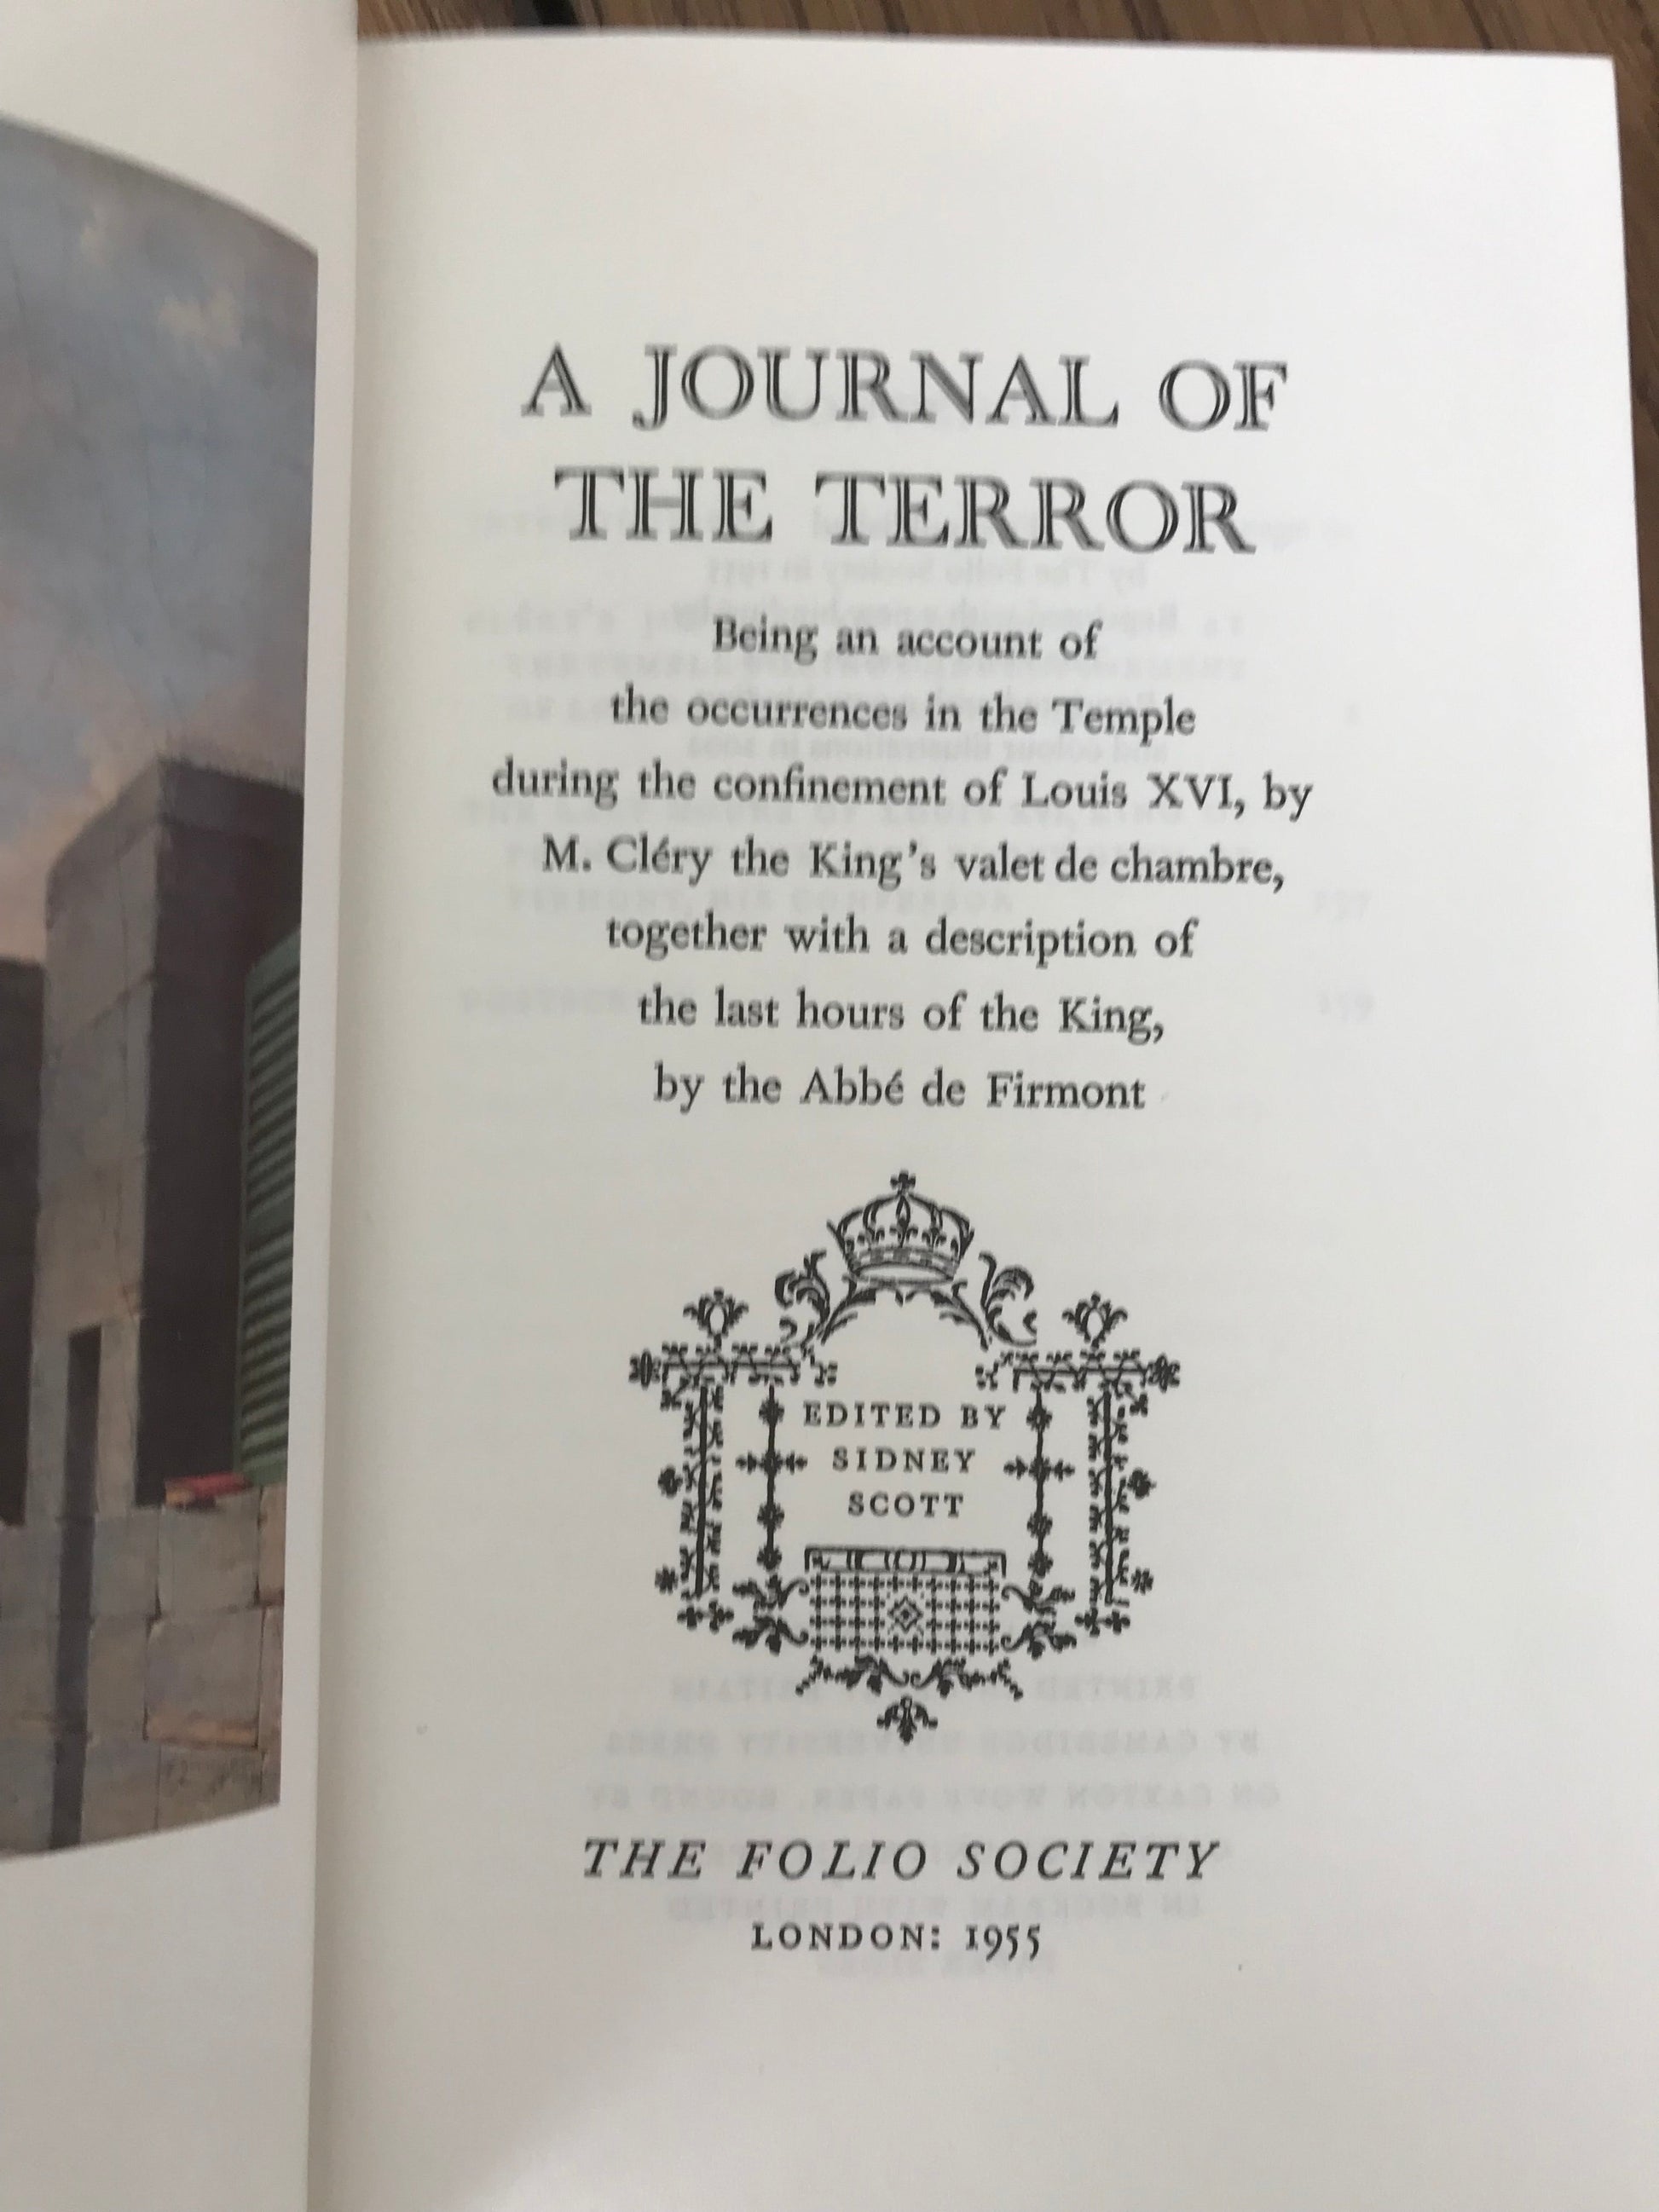 A JOURNAL OF THE TERROR - BY ABBE DE FIRMONT BooksCardsNBikes